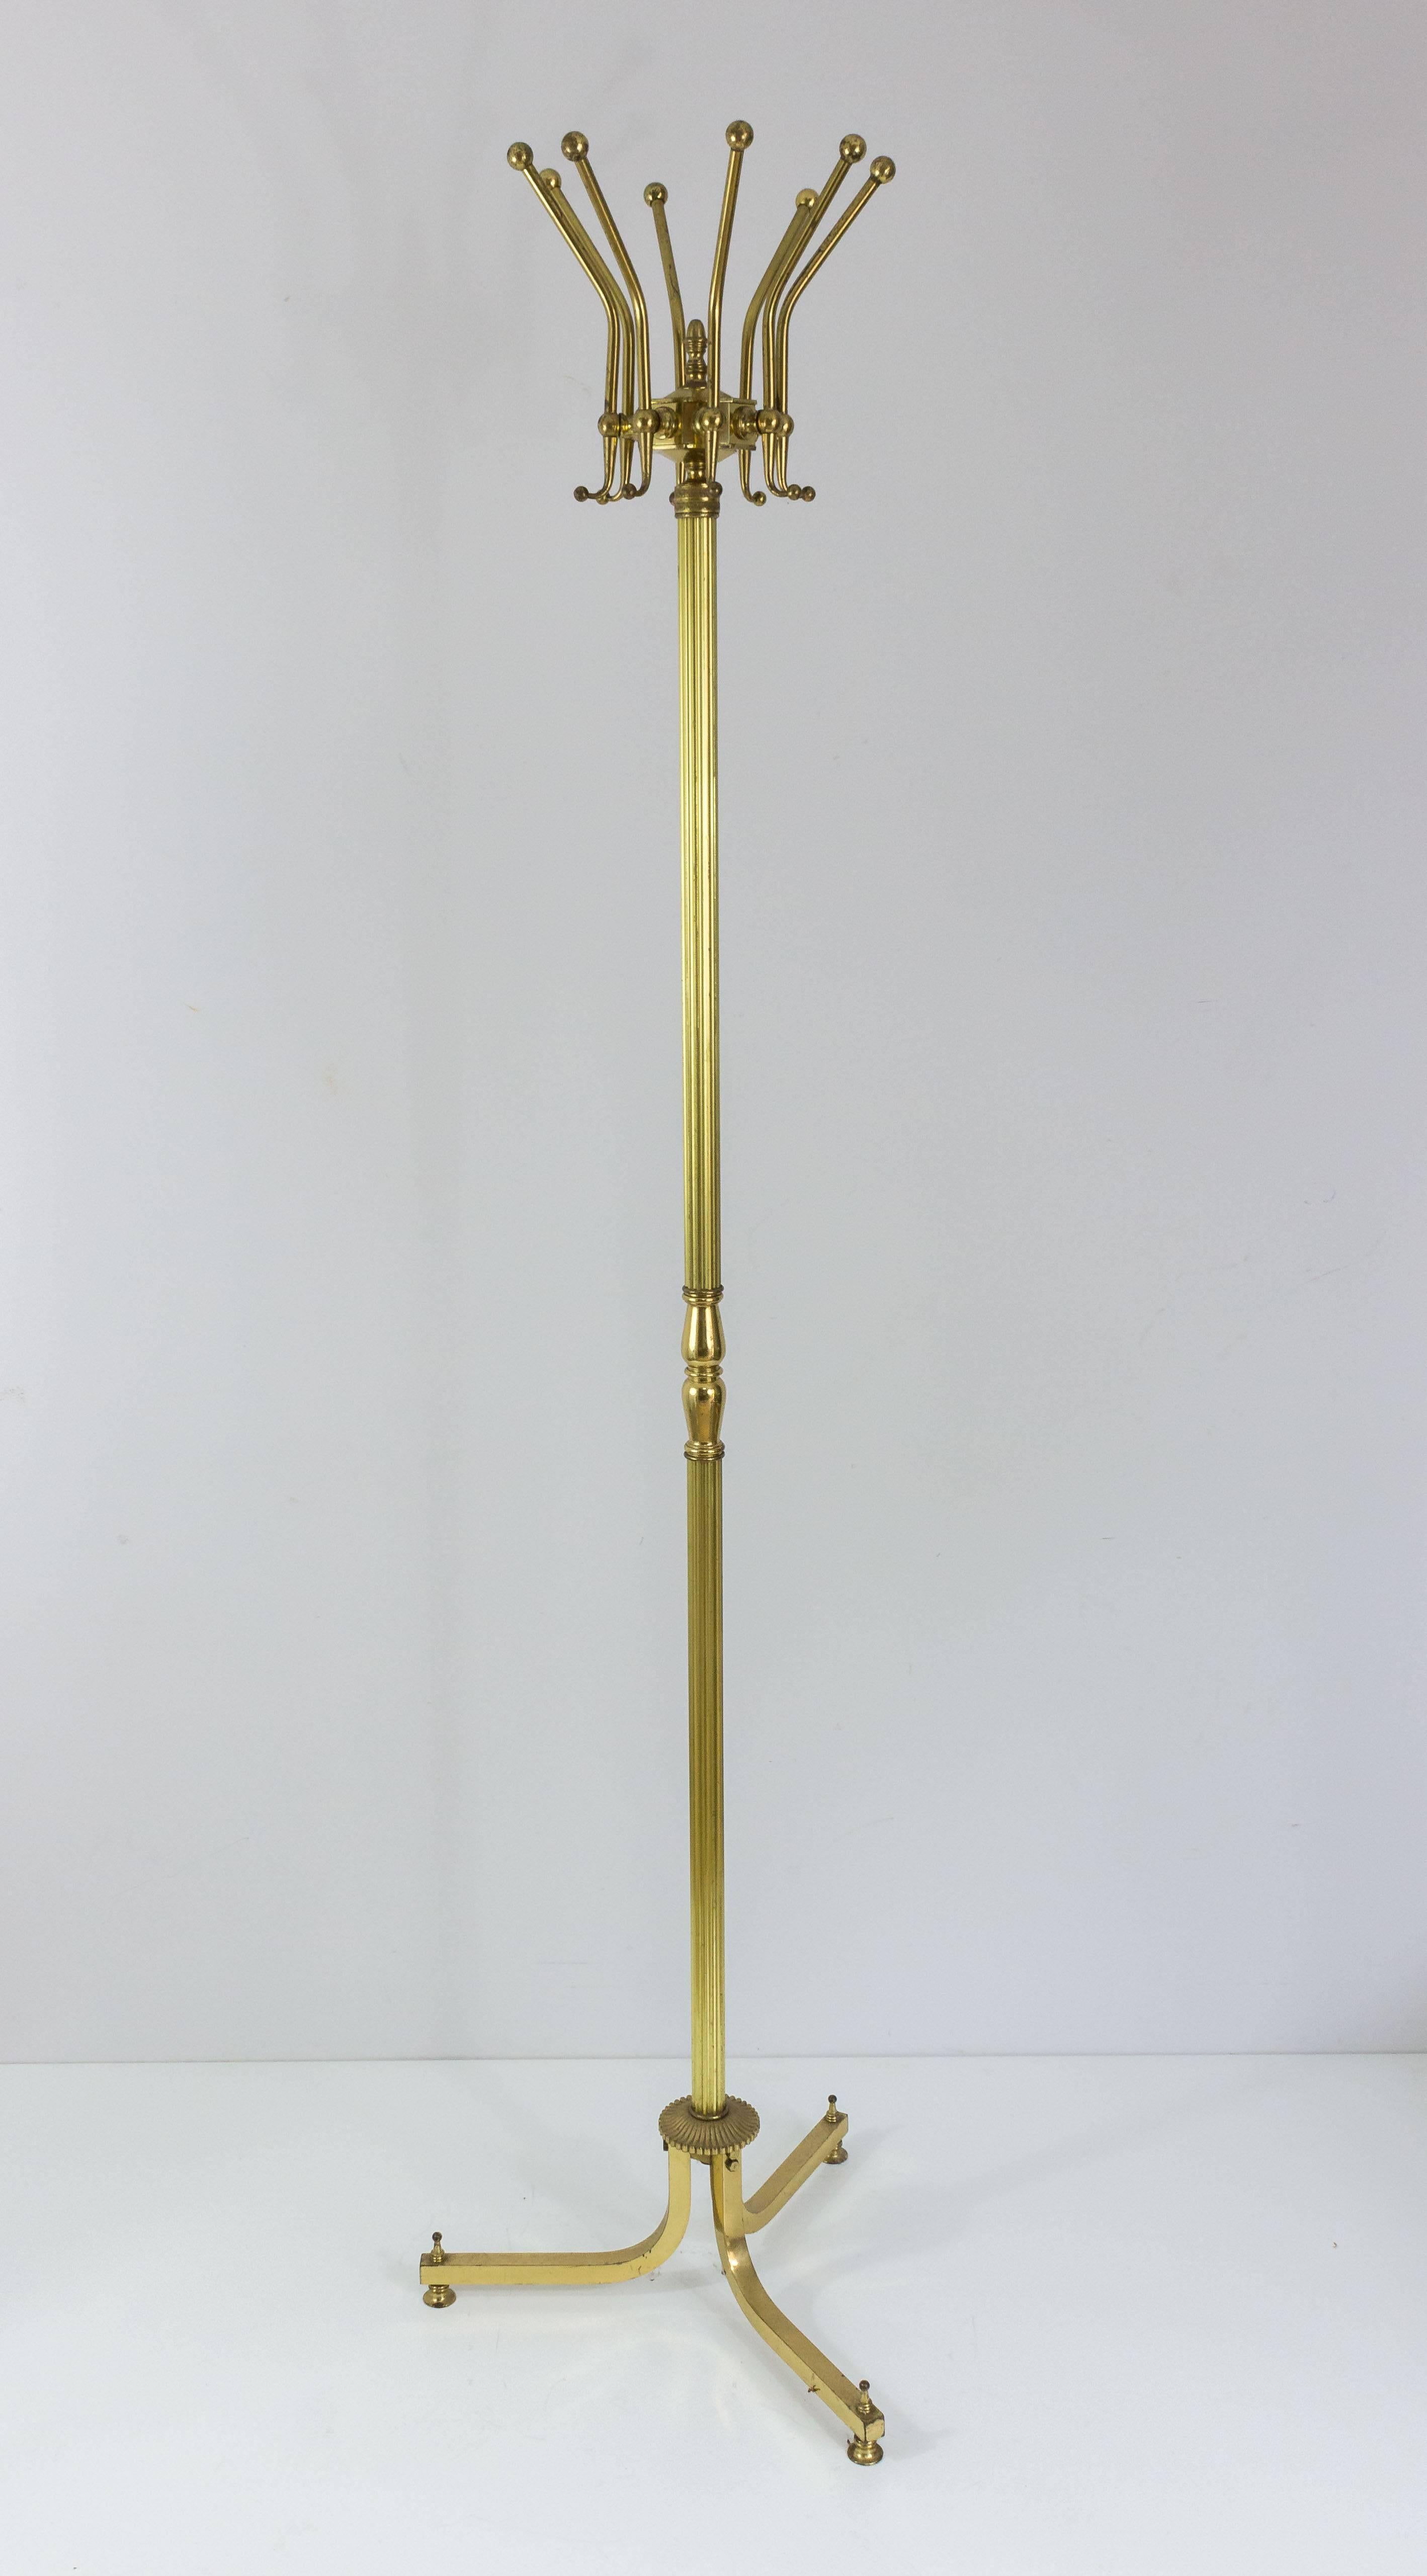 Brass coat rack with that will accommodate 8 coats or hats. French, circa 1940s.

This item is currently in France, please allow 2 to 4 weeks delivery to New York. Shipping costs from France to our warehouse in New York included in price.

